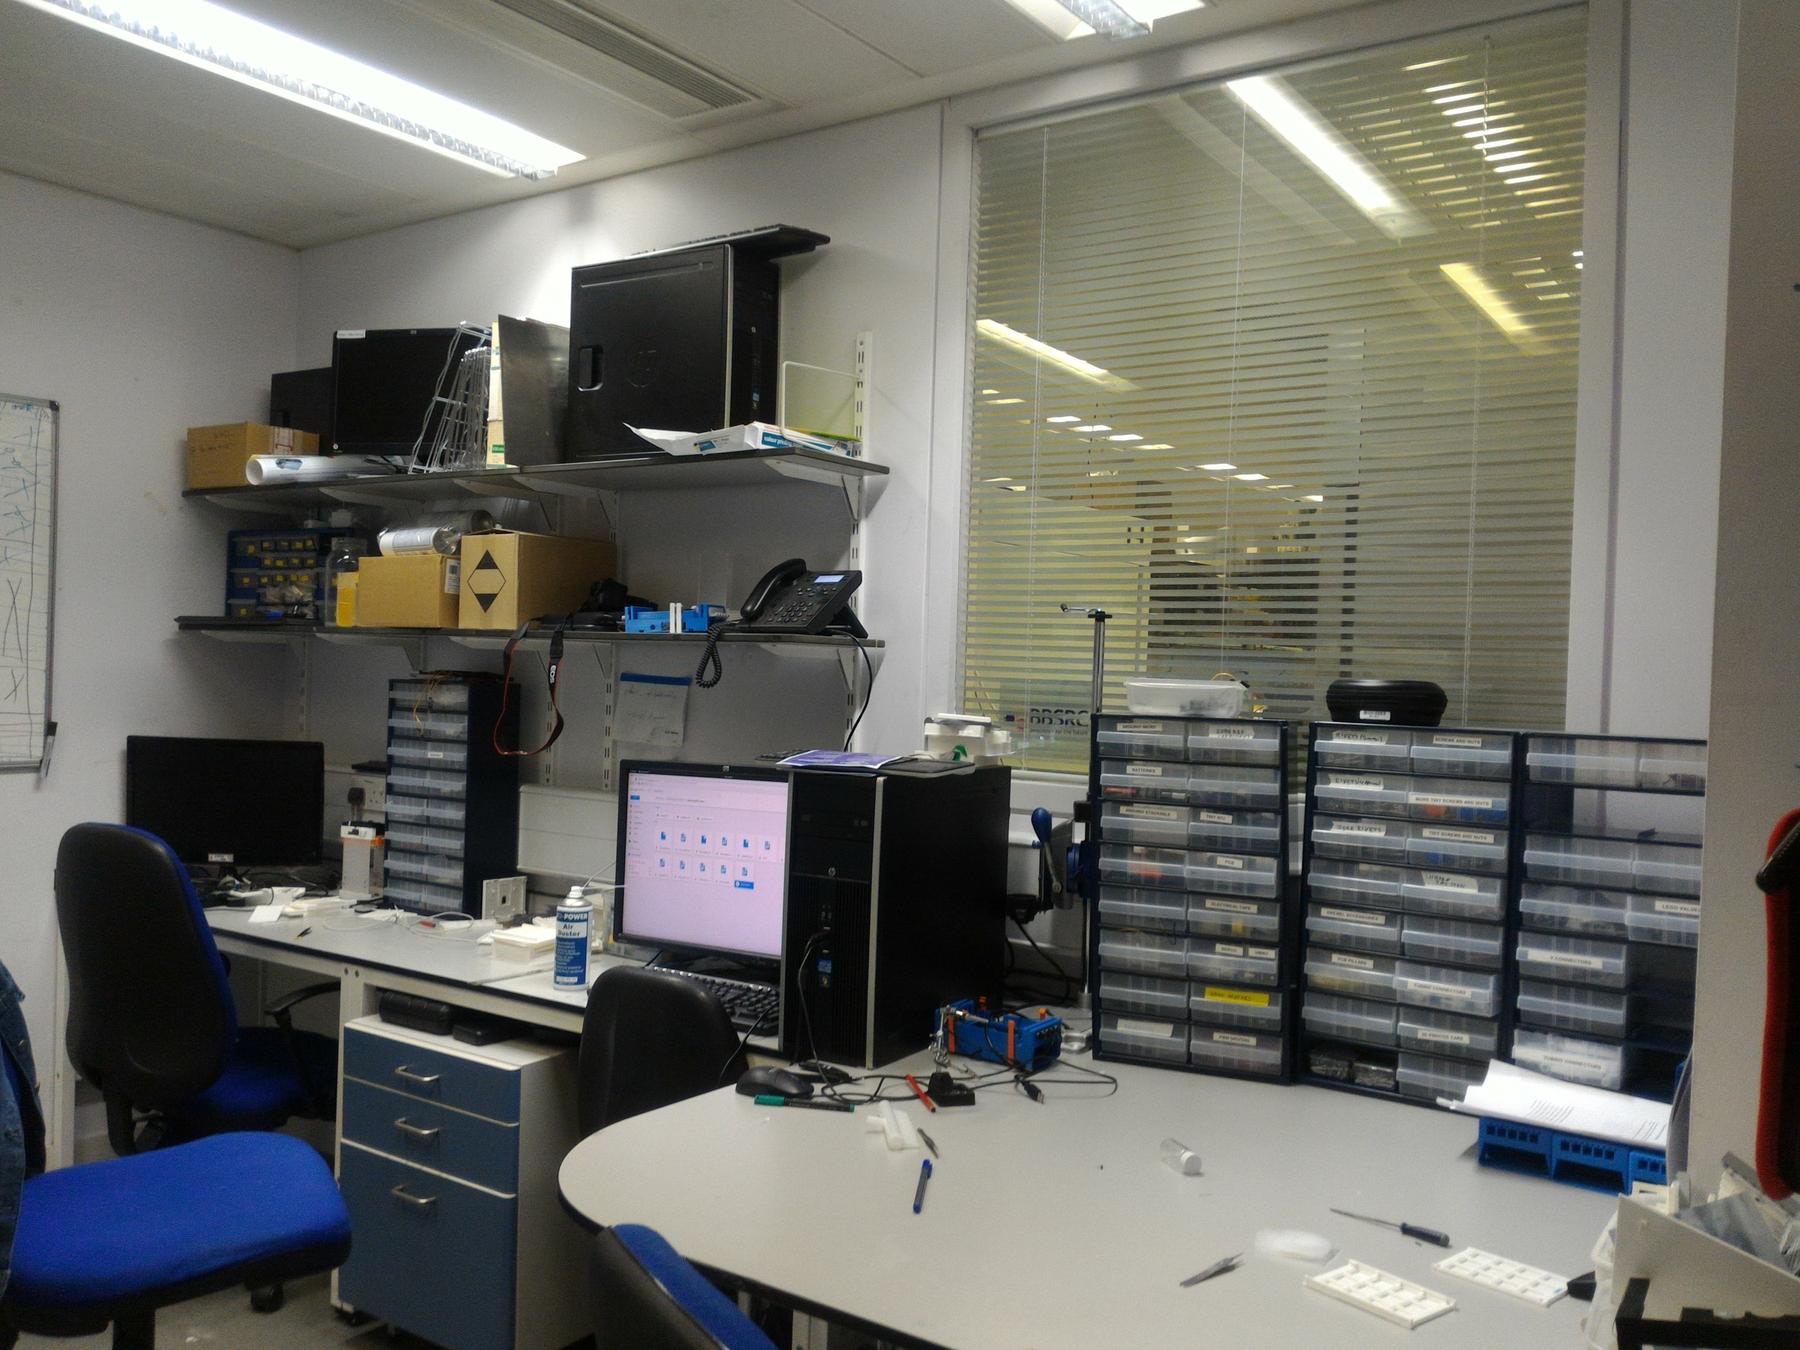 Another view of the hackspace (in unusual pristine and not messy conditions)